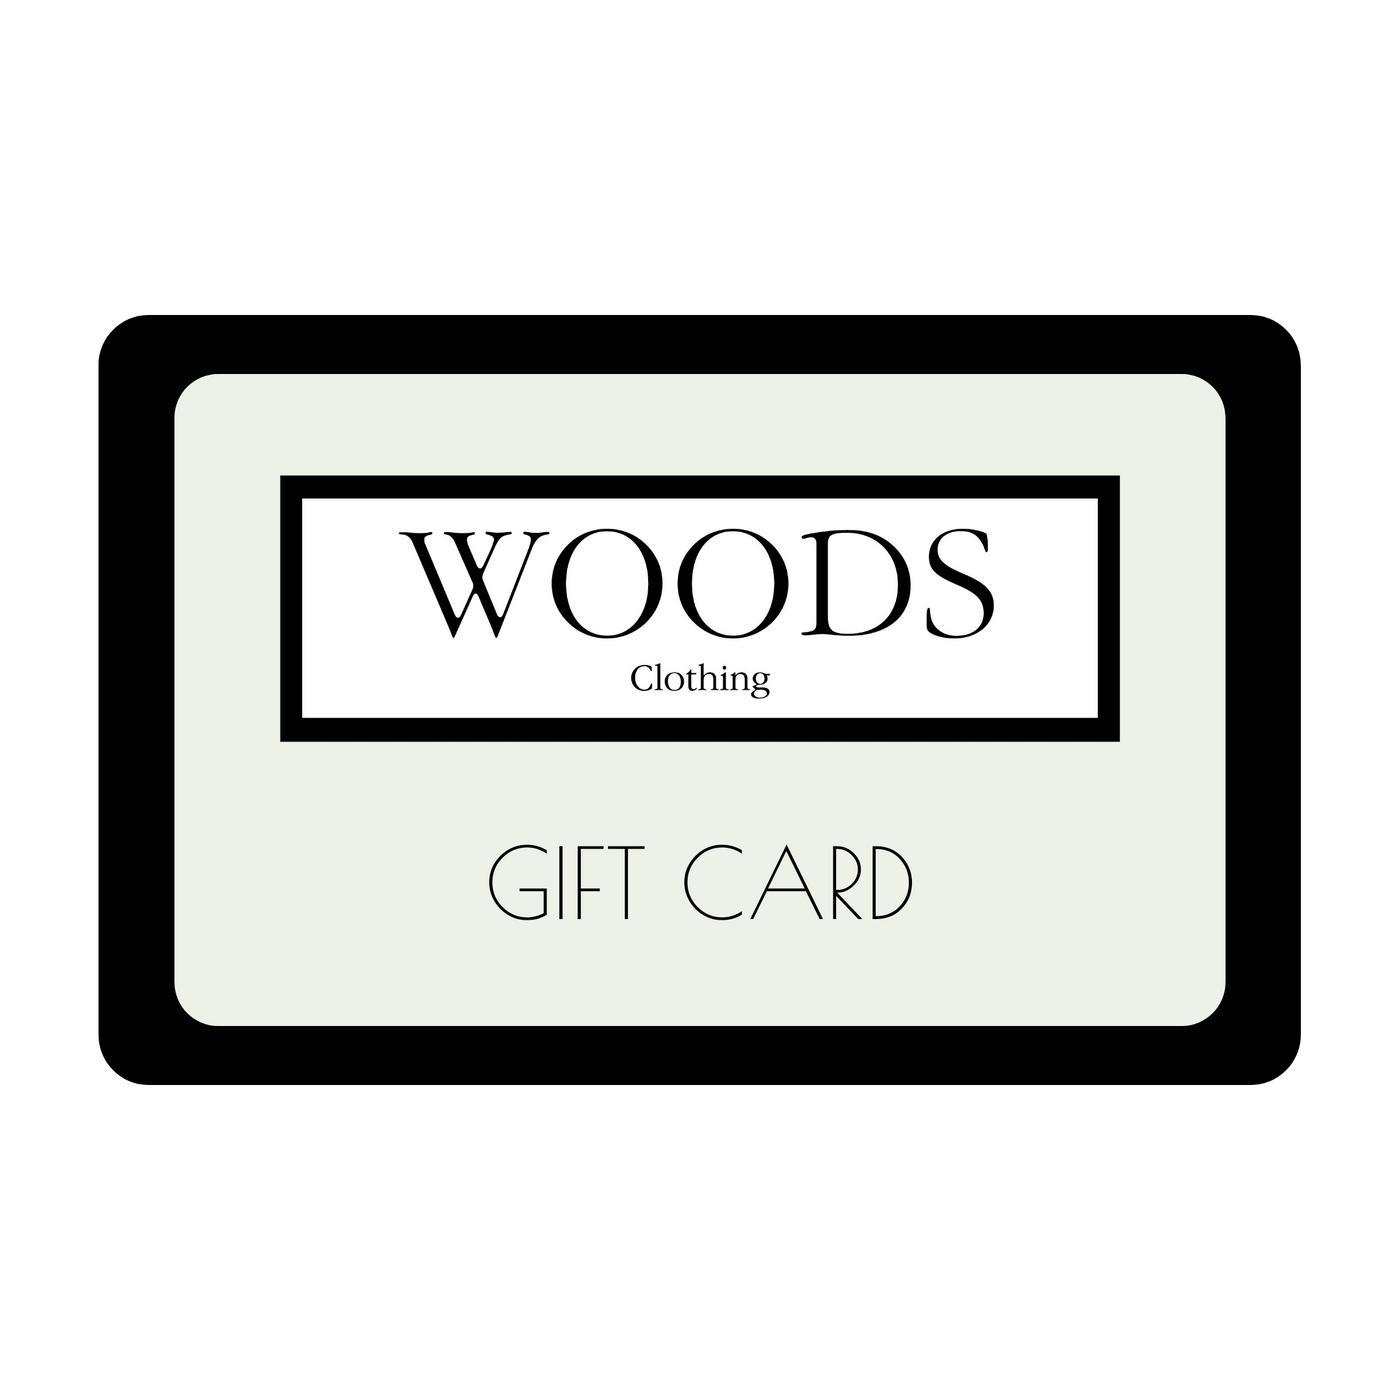 Woods Clothing Gift Card